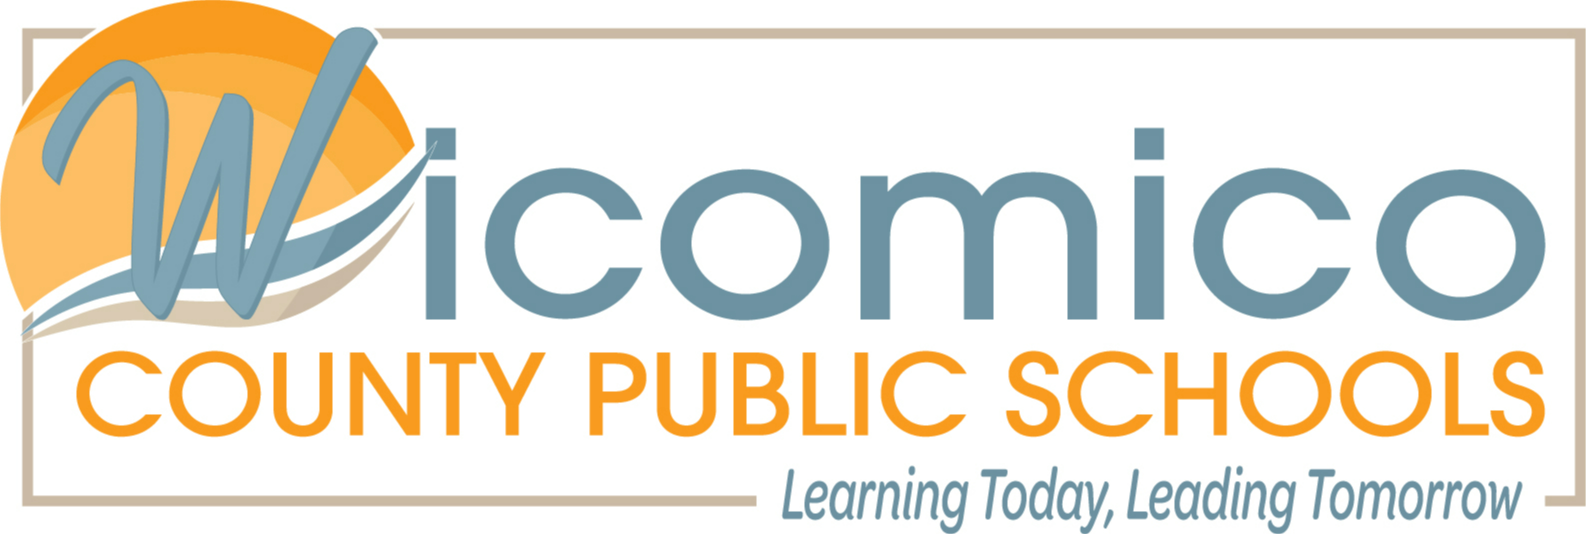 Learning Today, Leading Tomorrow with Wicomico County Public Schools